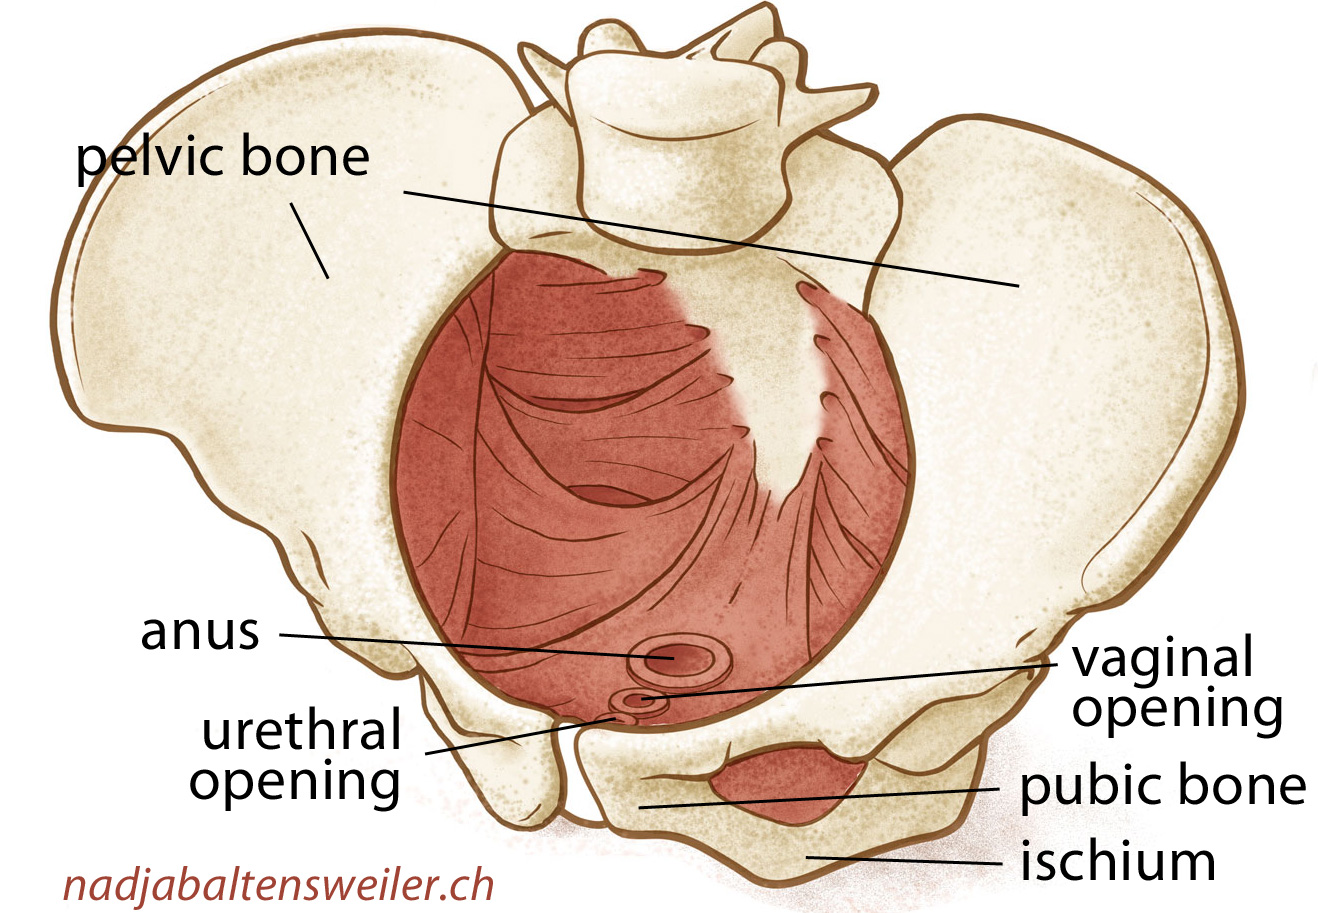 You can see the pelvic bone with the pelvic floor muscles, the anus, the vaginal opening and the urethral opening.